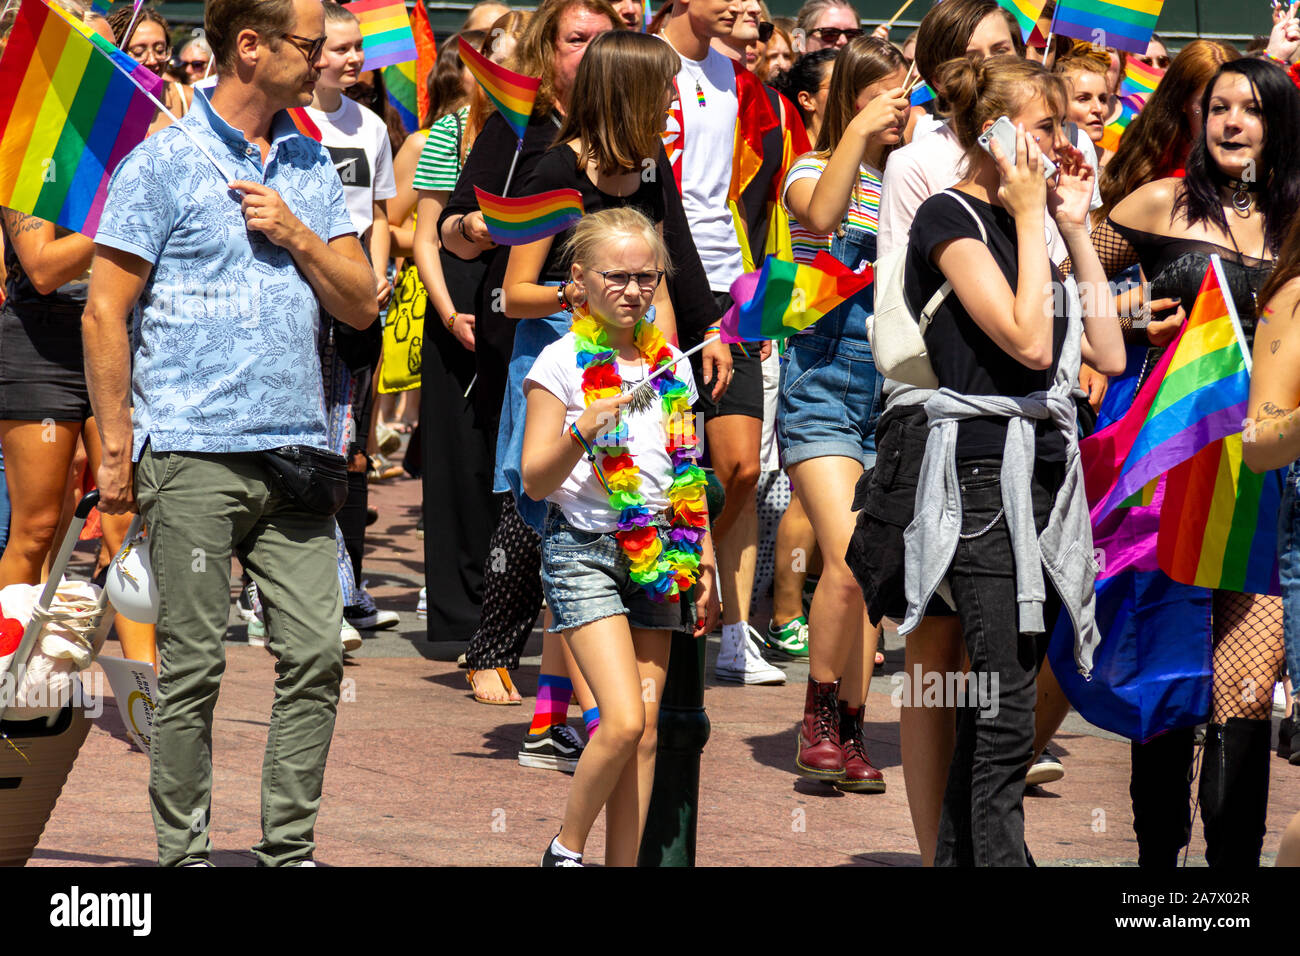 Malmö, Sweden - July 20 2019: A young girl in glasses with a sceptical look waves her rainbow colored pride flag while attending the 2019 pride parade Stock Photo